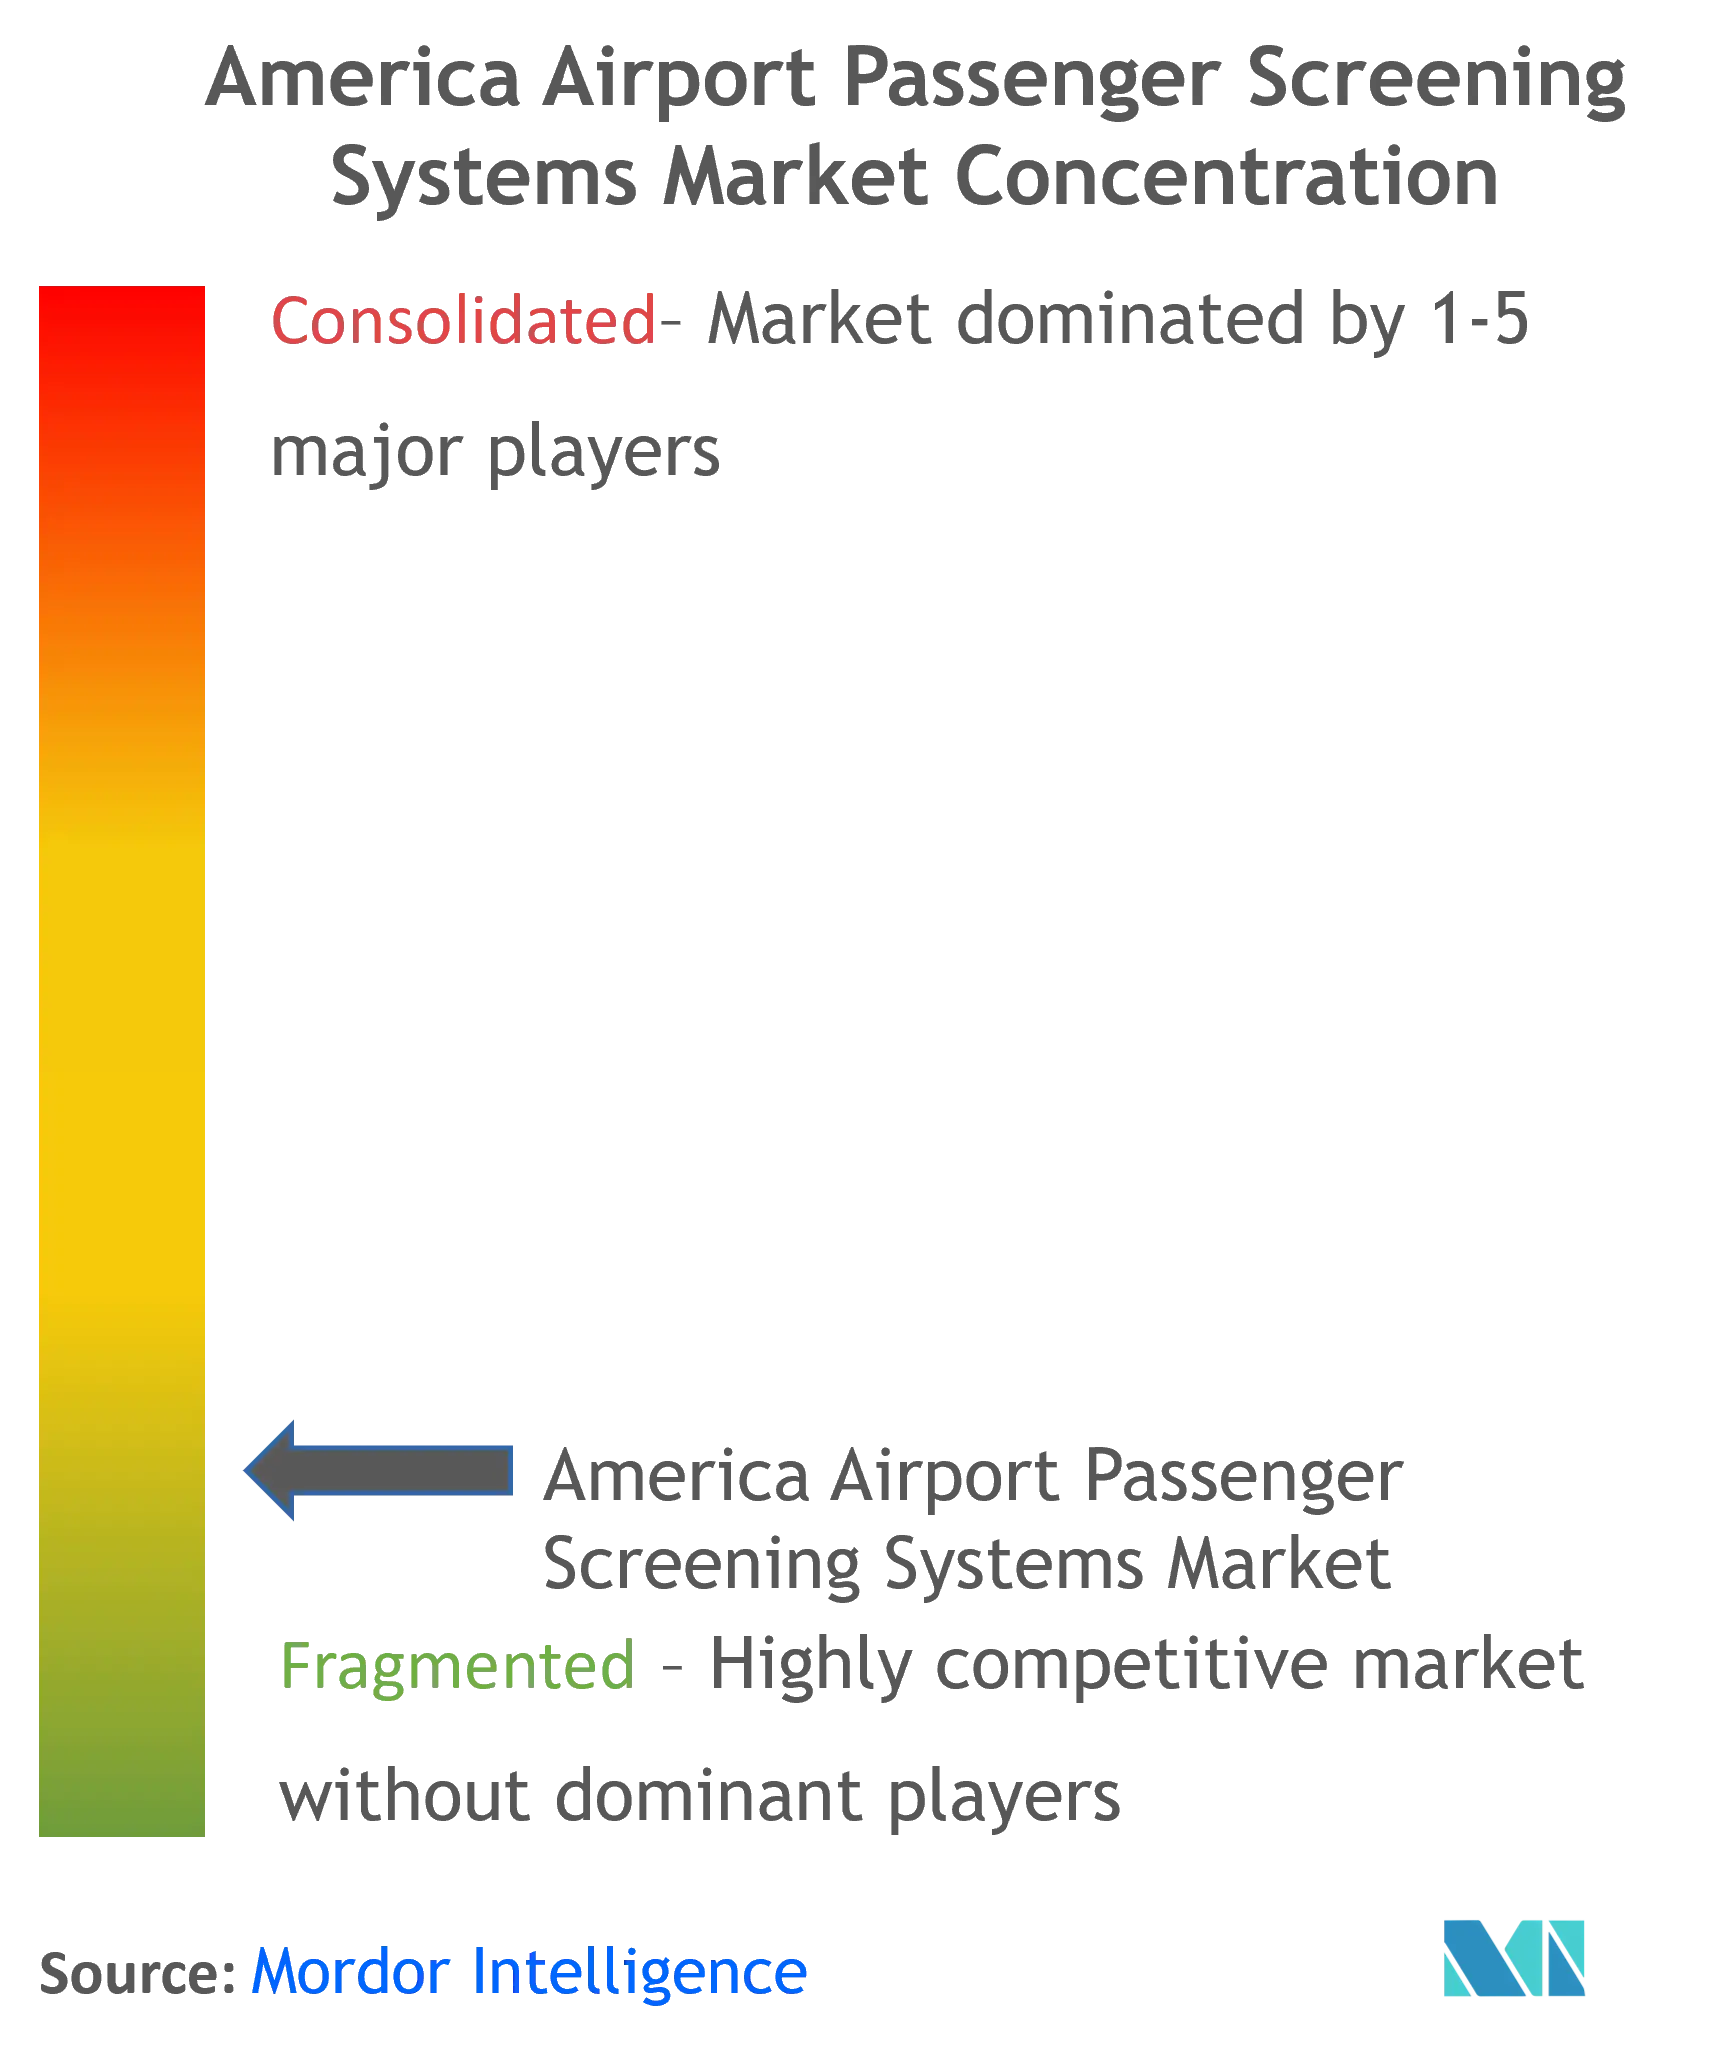 America Airport Passenger Screening Systems Market Concentration